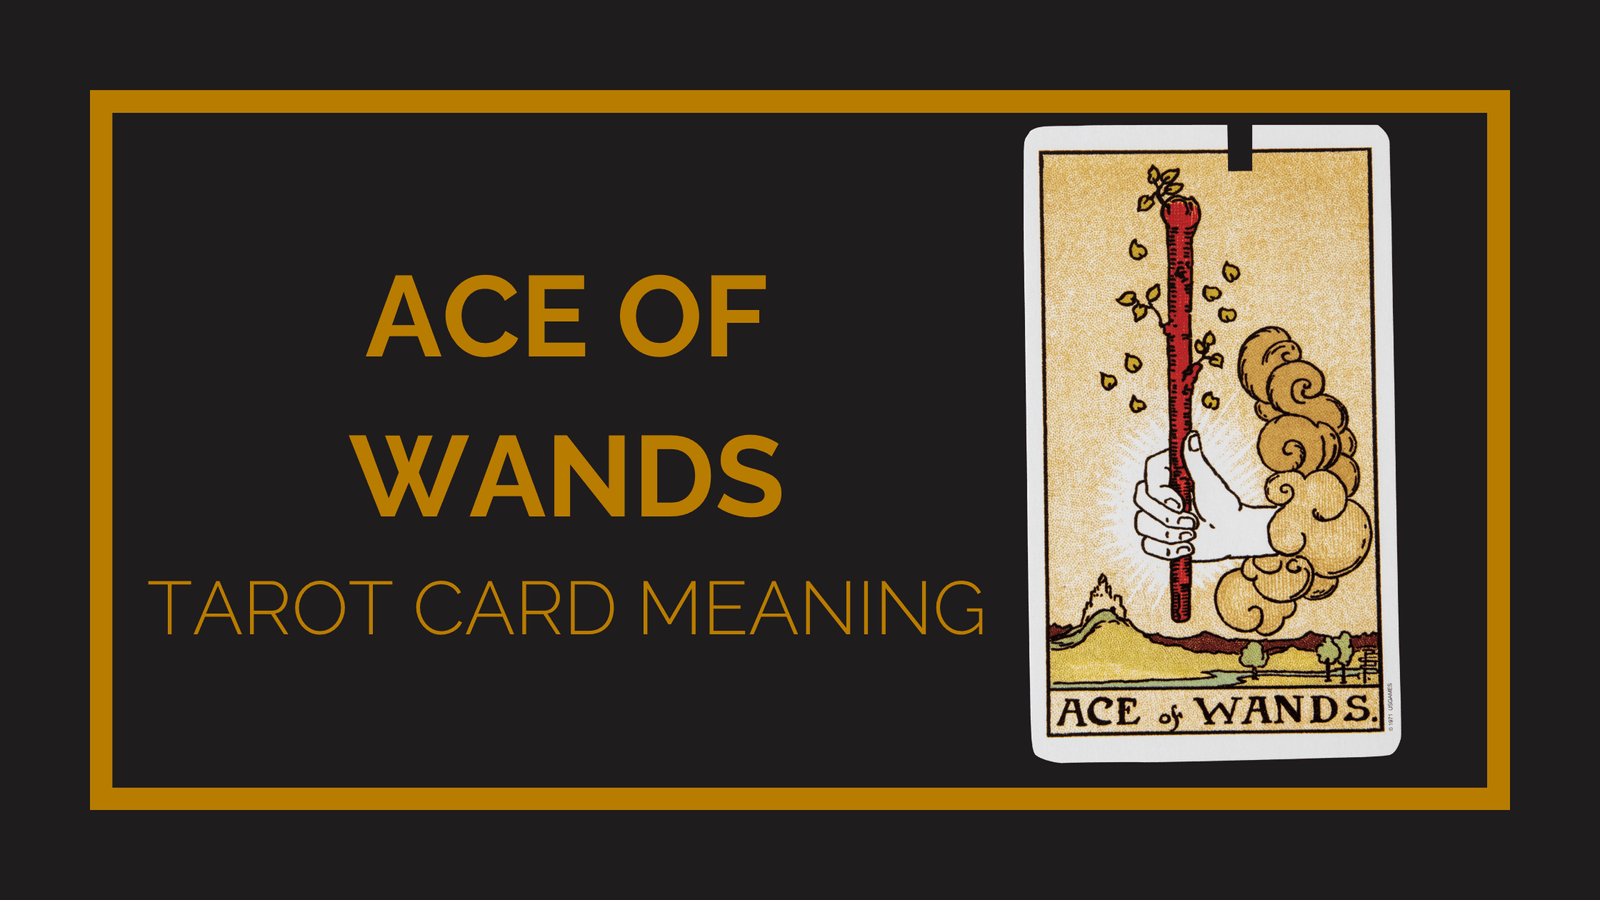 Ace of wands tarot card meaning | tarot with gord